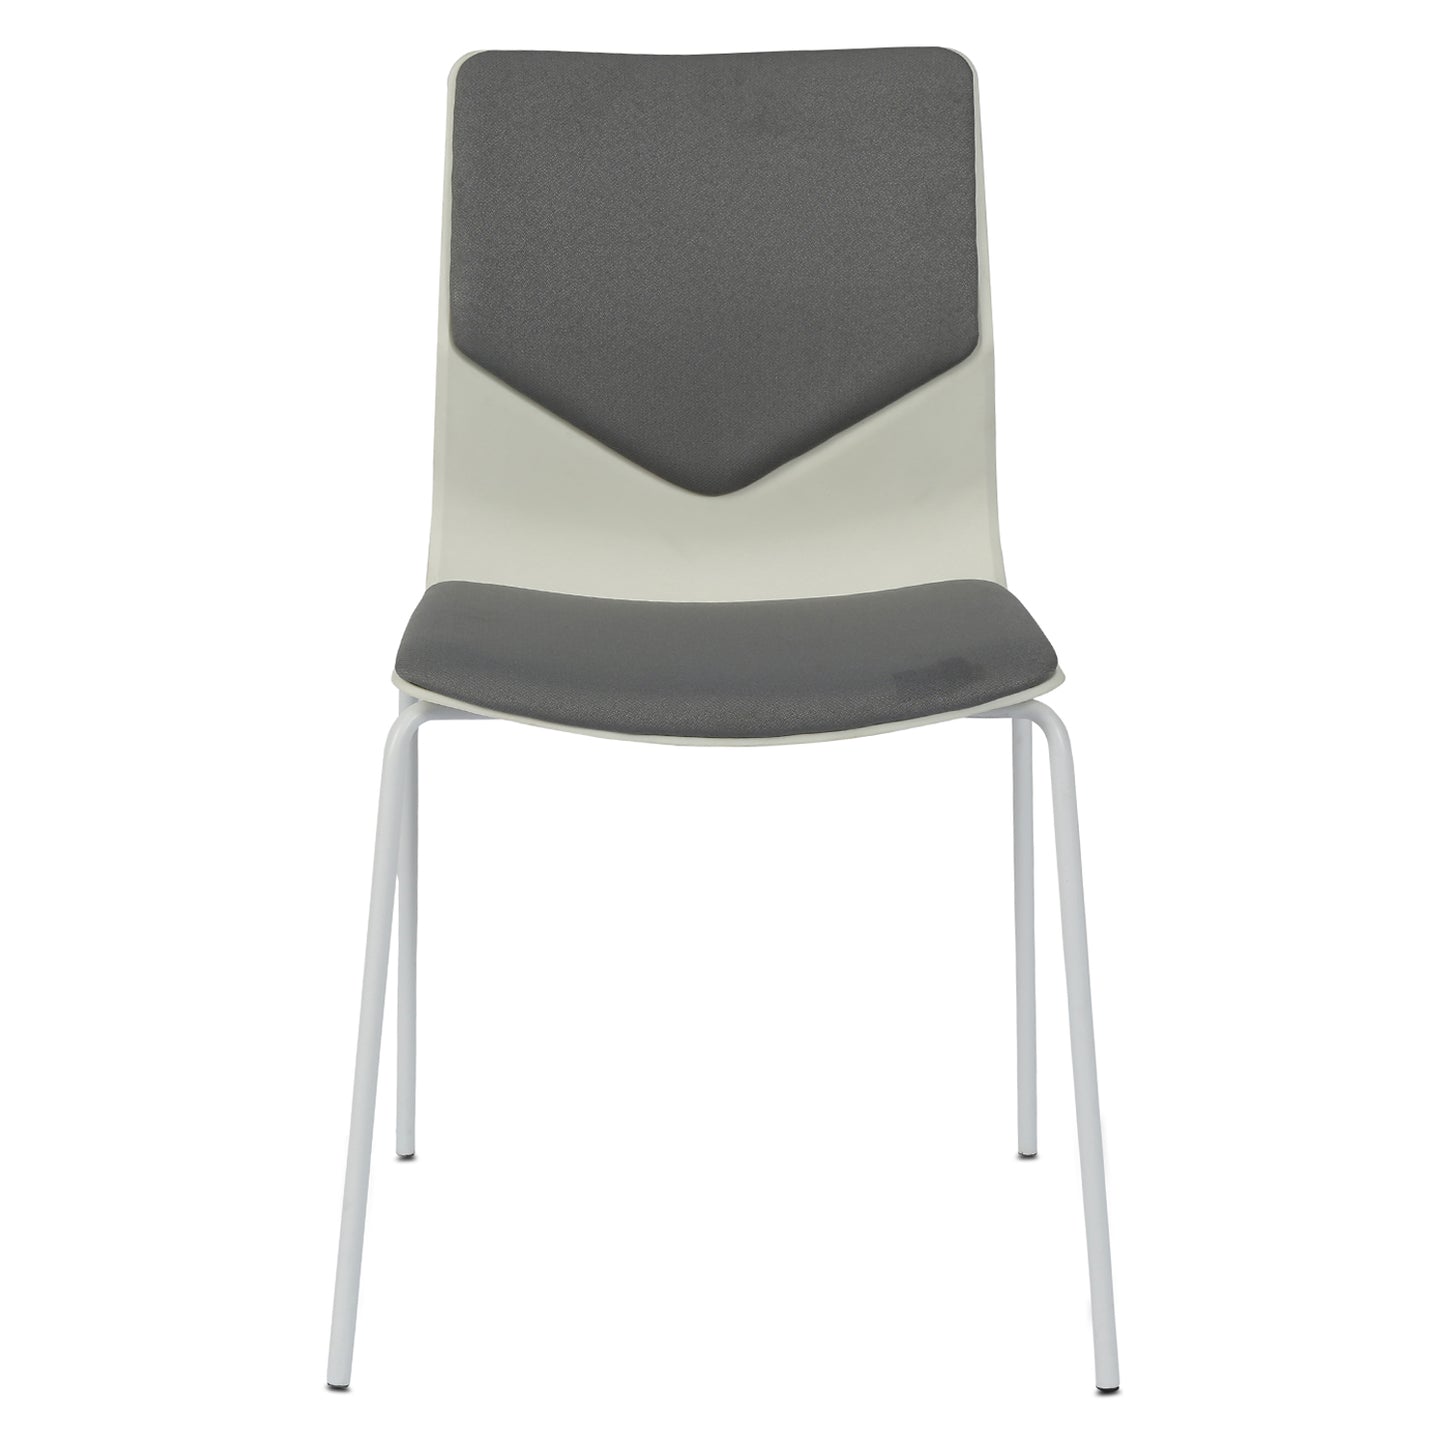 Zing Cafeteria Chair with Seat & Back Cushion